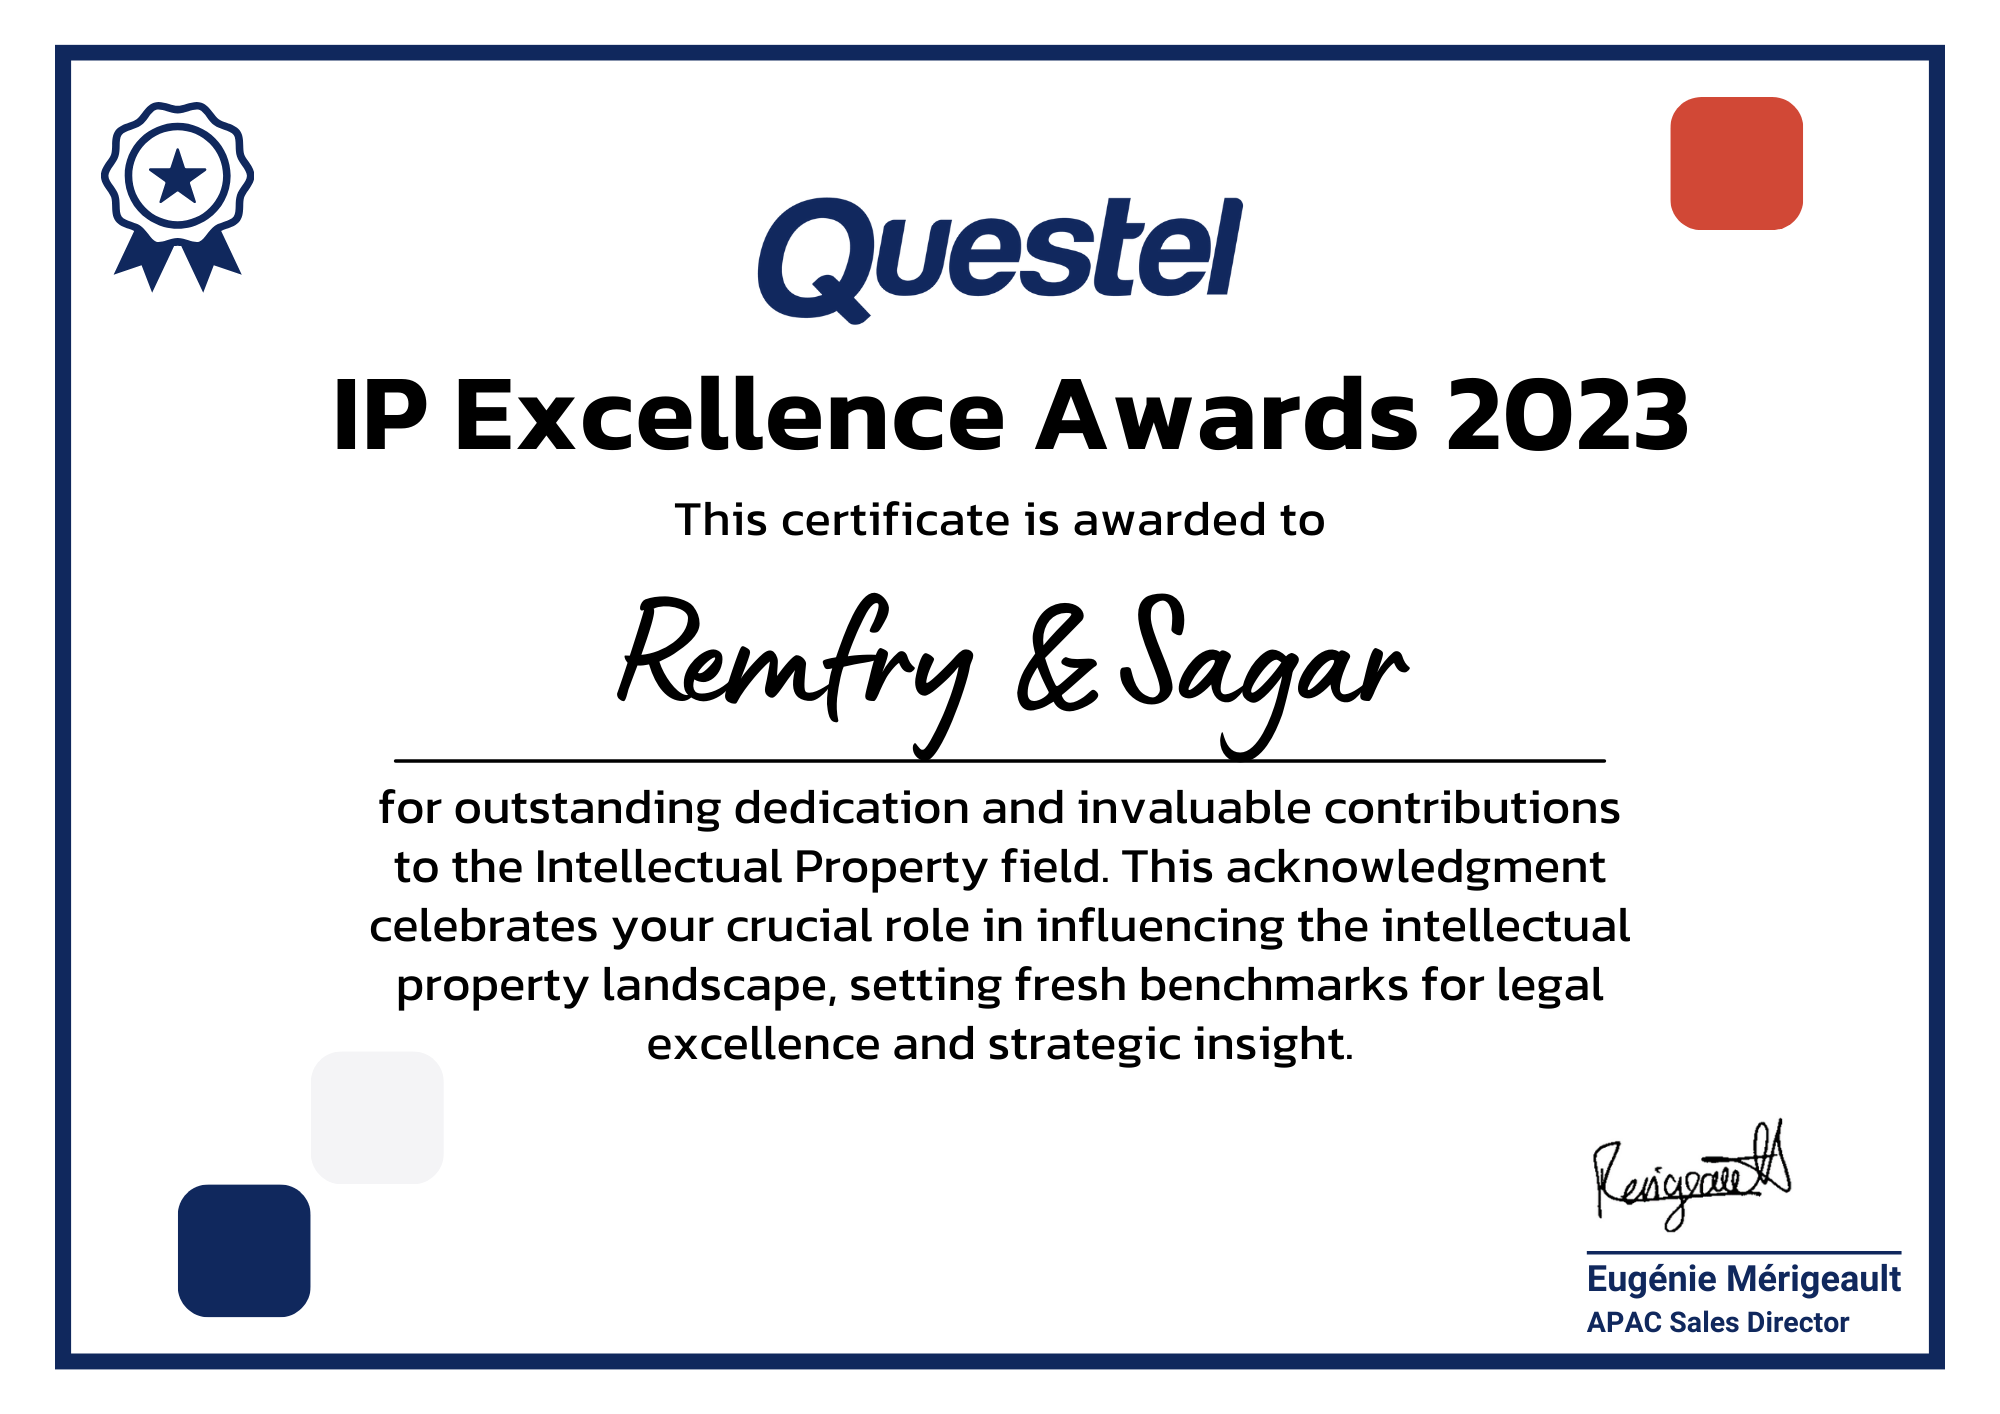 Questel’s ‘IP Excellence Award 2023’